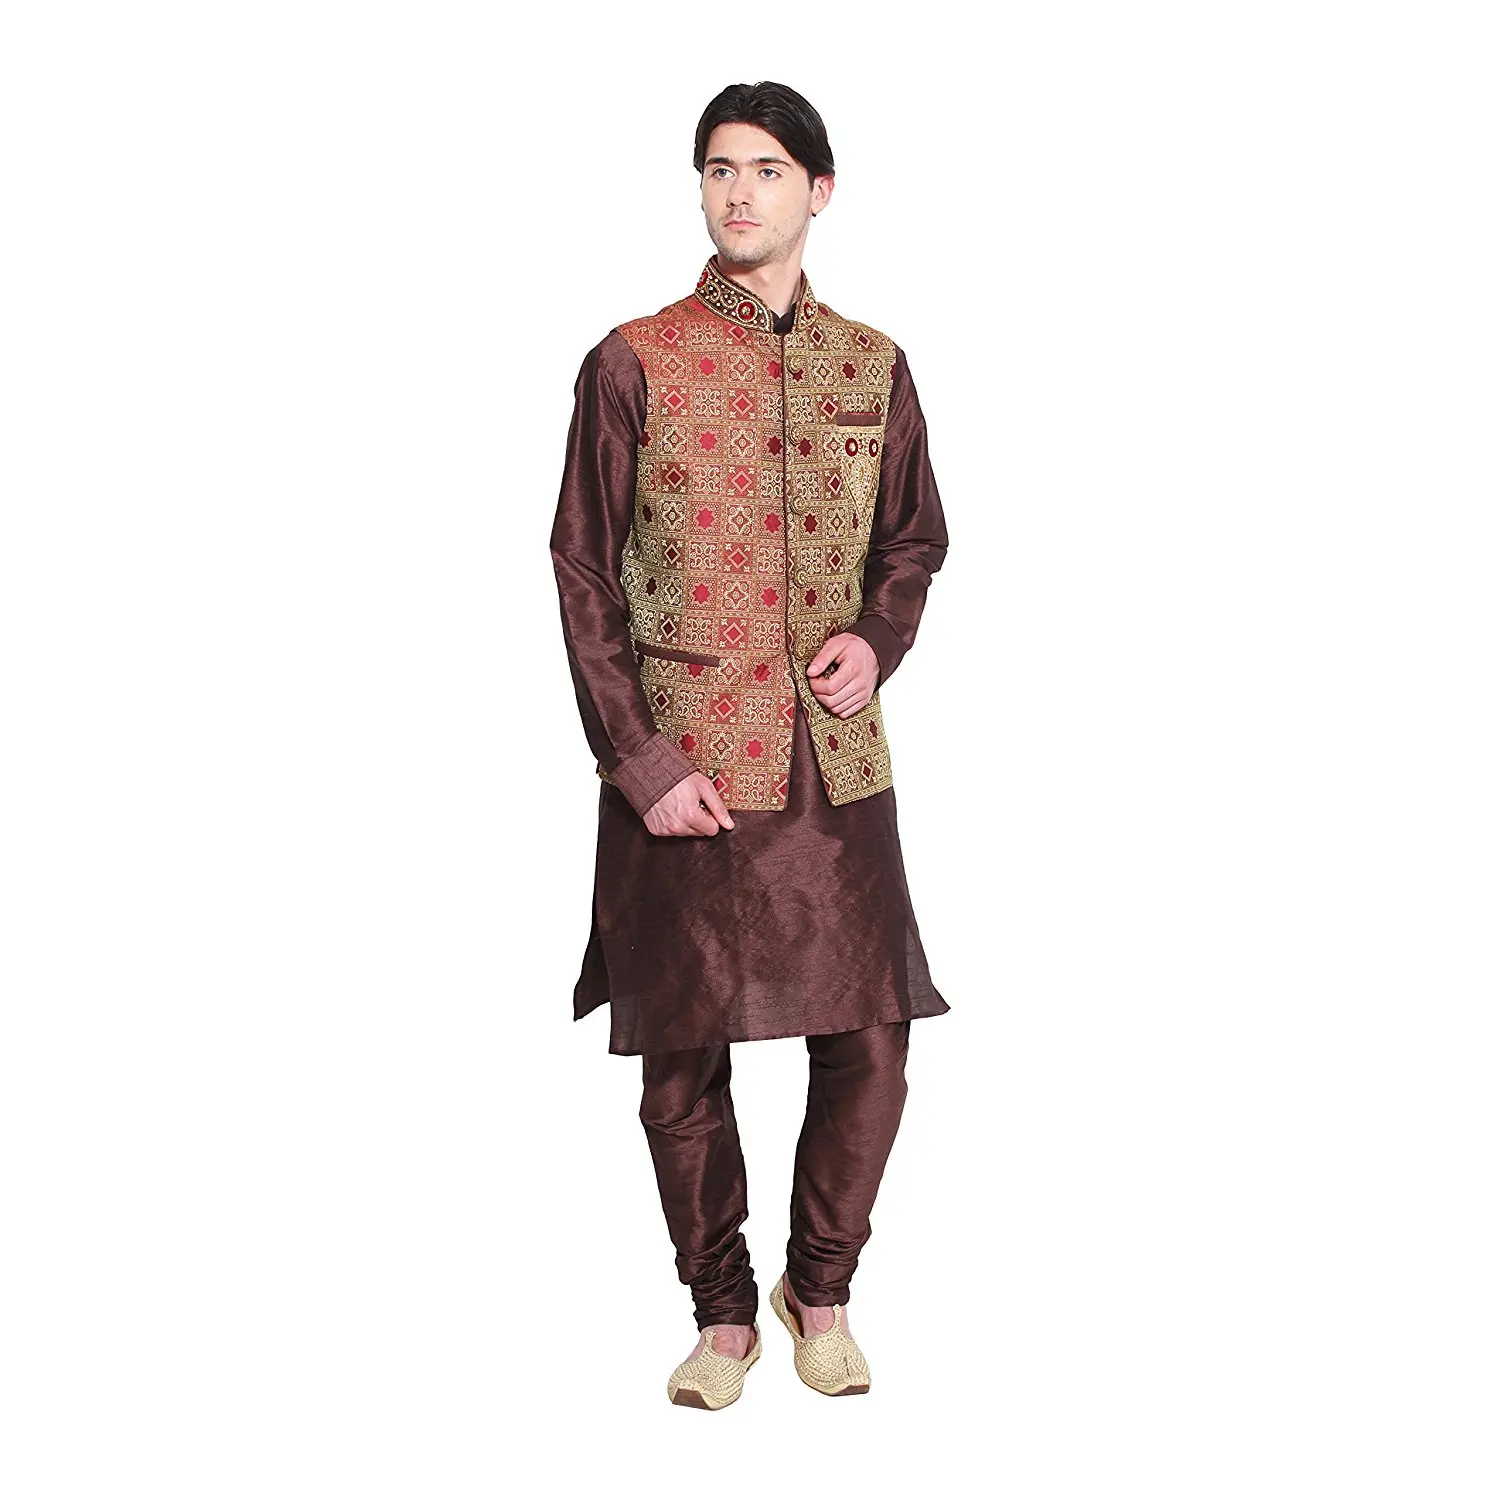 Cheap Indian Waistcoat For Men Find Indian Waistcoat For Men Deals On